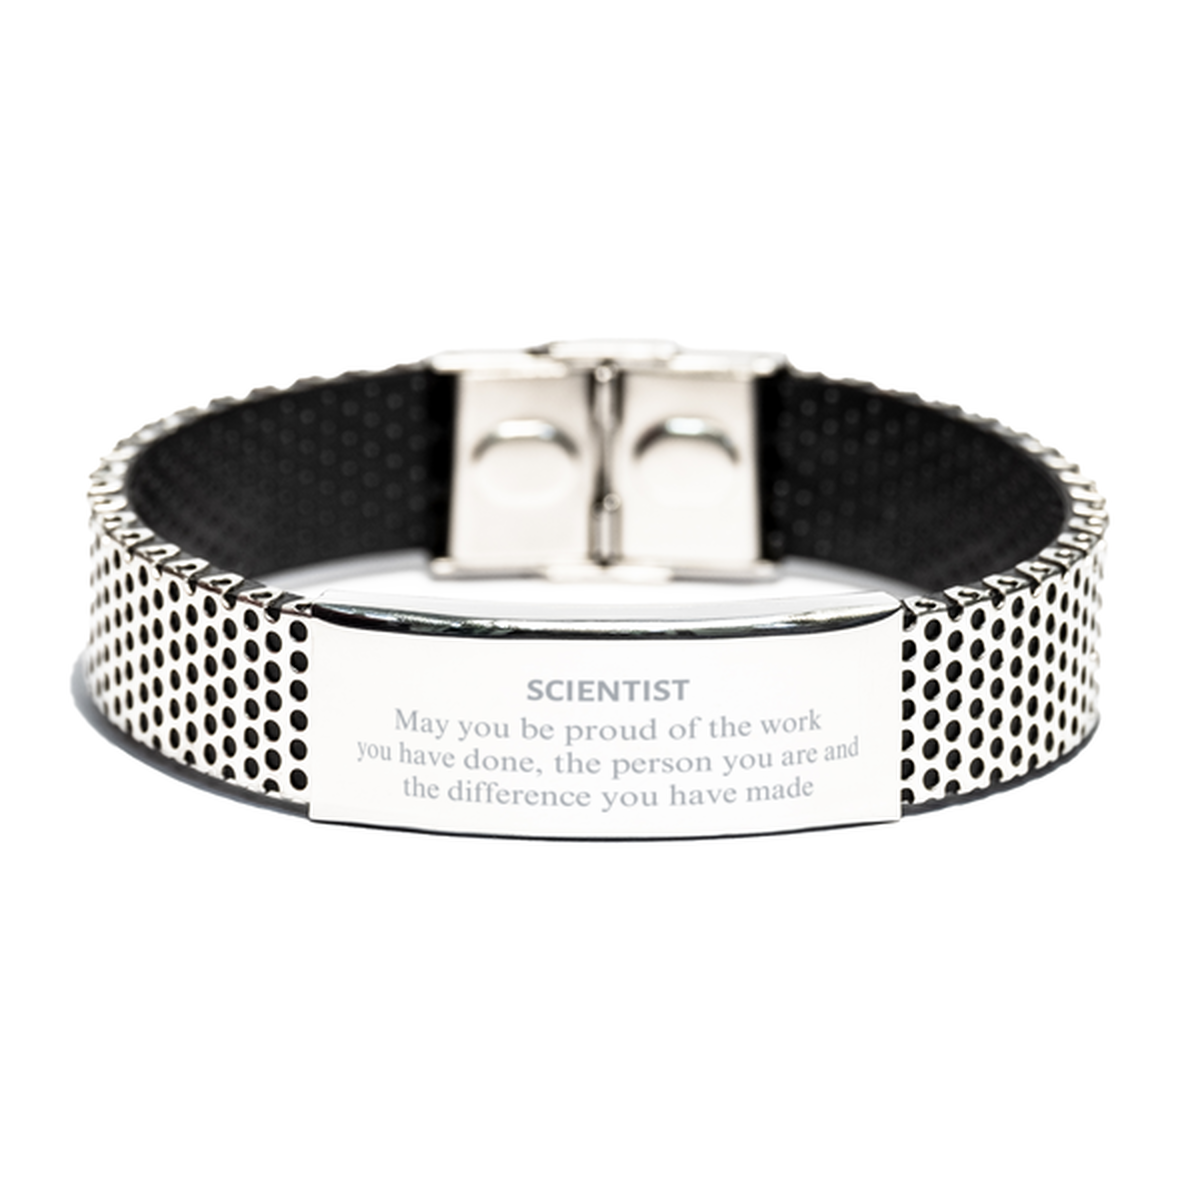 Scientist May you be proud of the work you have done, Retirement Scientist Stainless Steel Bracelet for Colleague Appreciation Gifts Amazing for Scientist